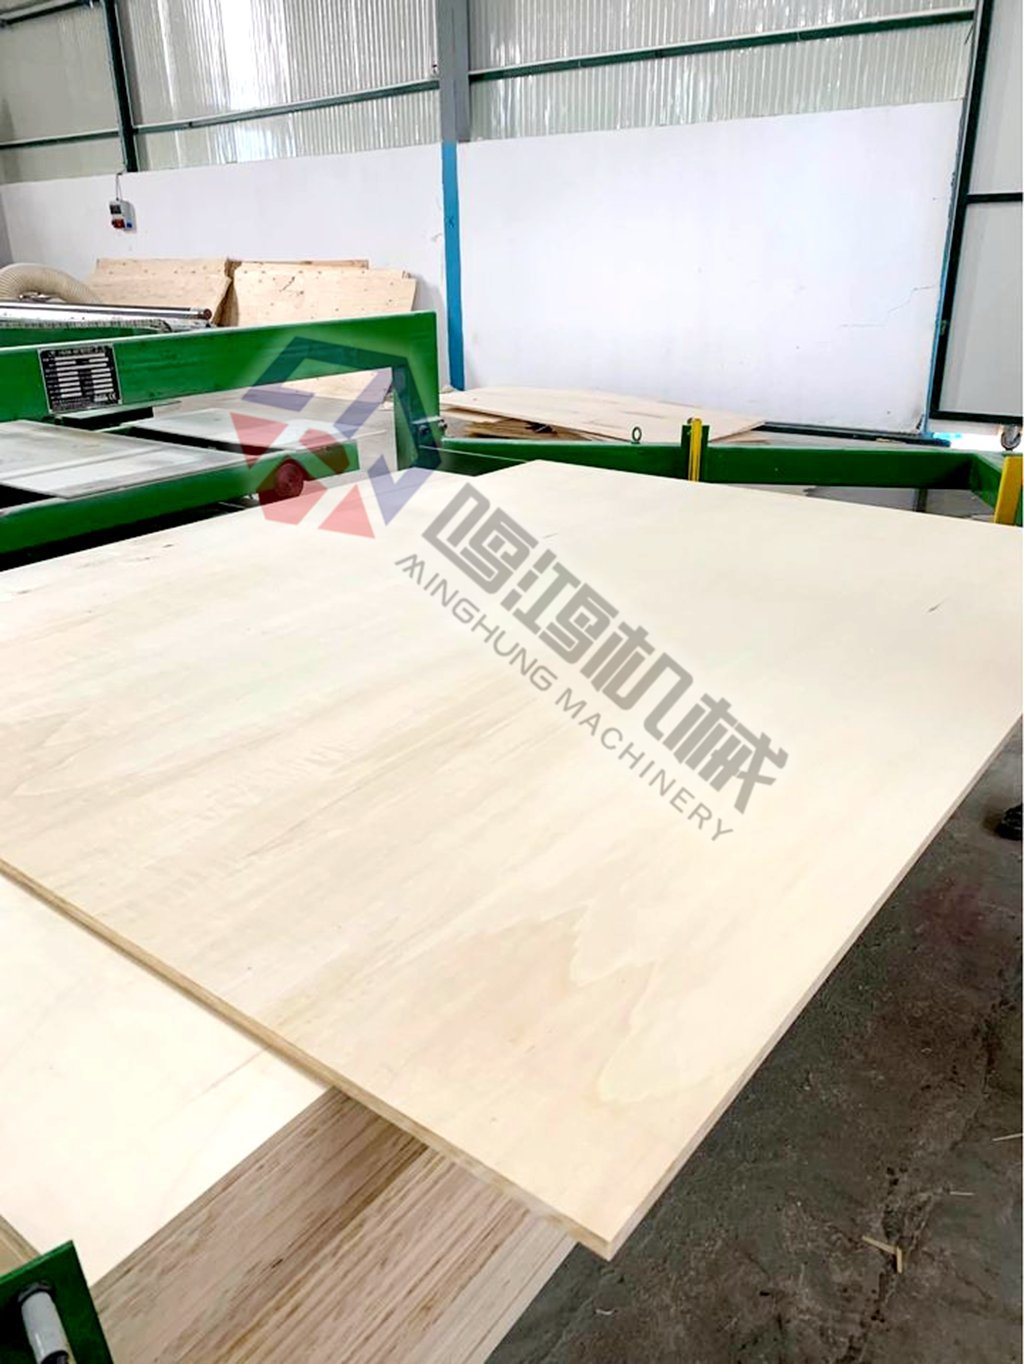 Auto Cutting Trimming Machine for Plywood Production